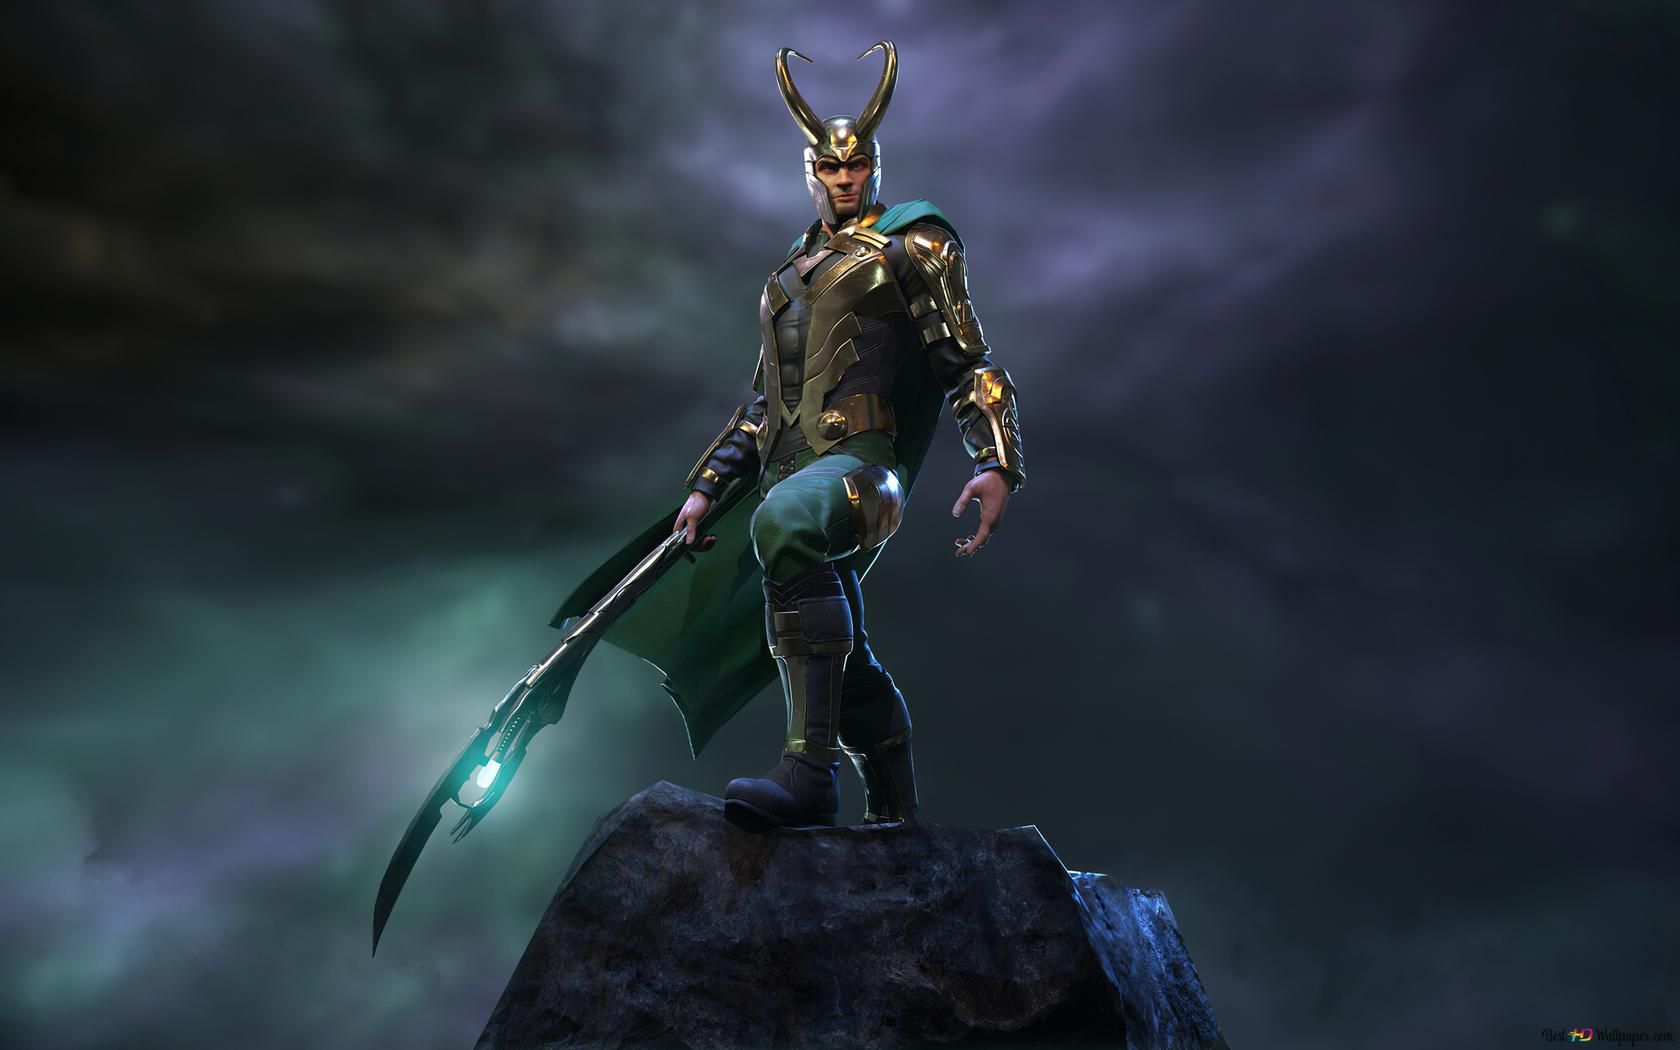 A character from the movie thor is standing on top of some rocks - Loki